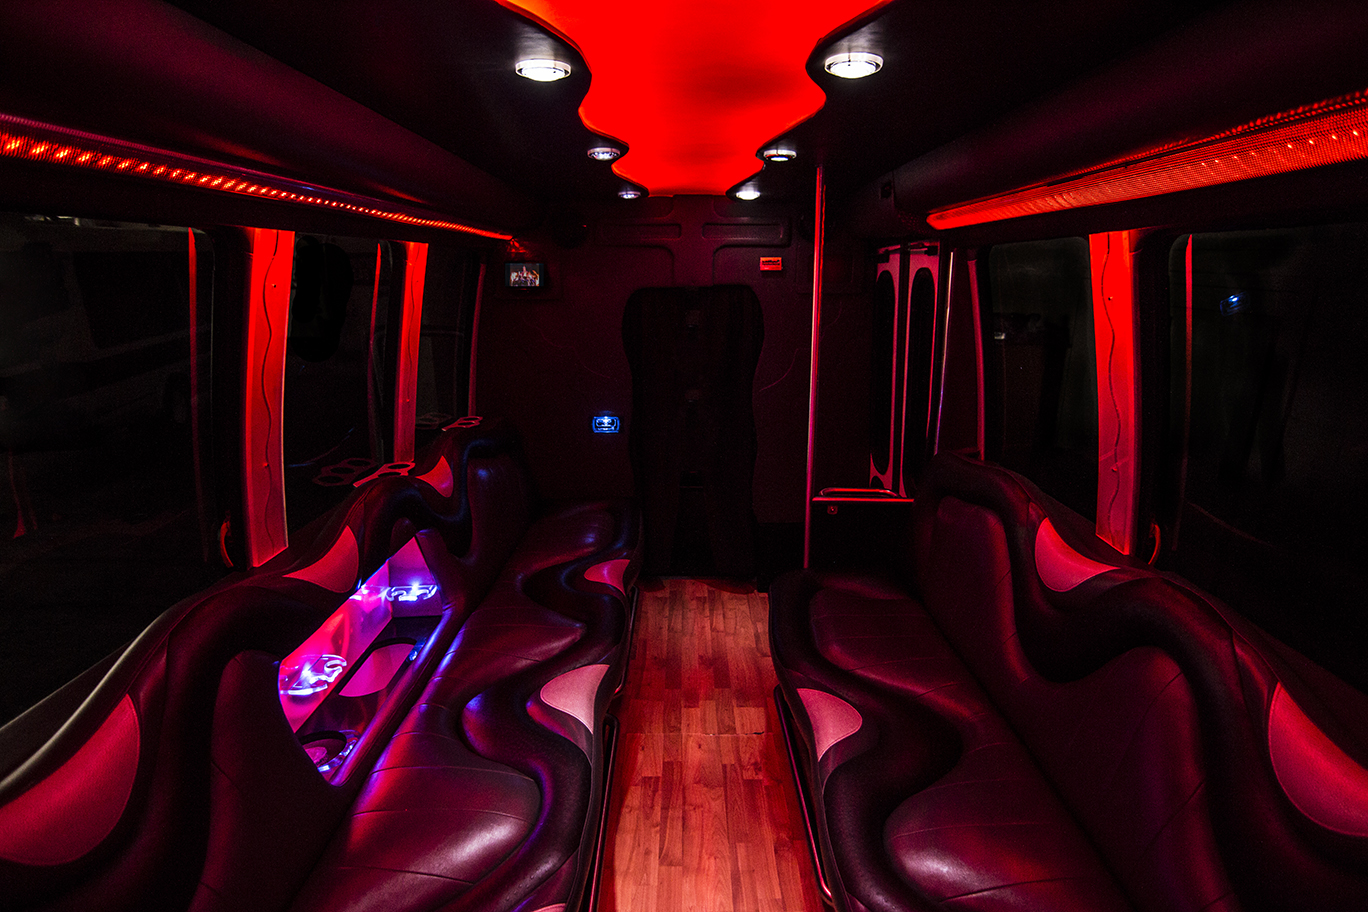 An opposite view of the 14 passenger limo bus this time with red lights.